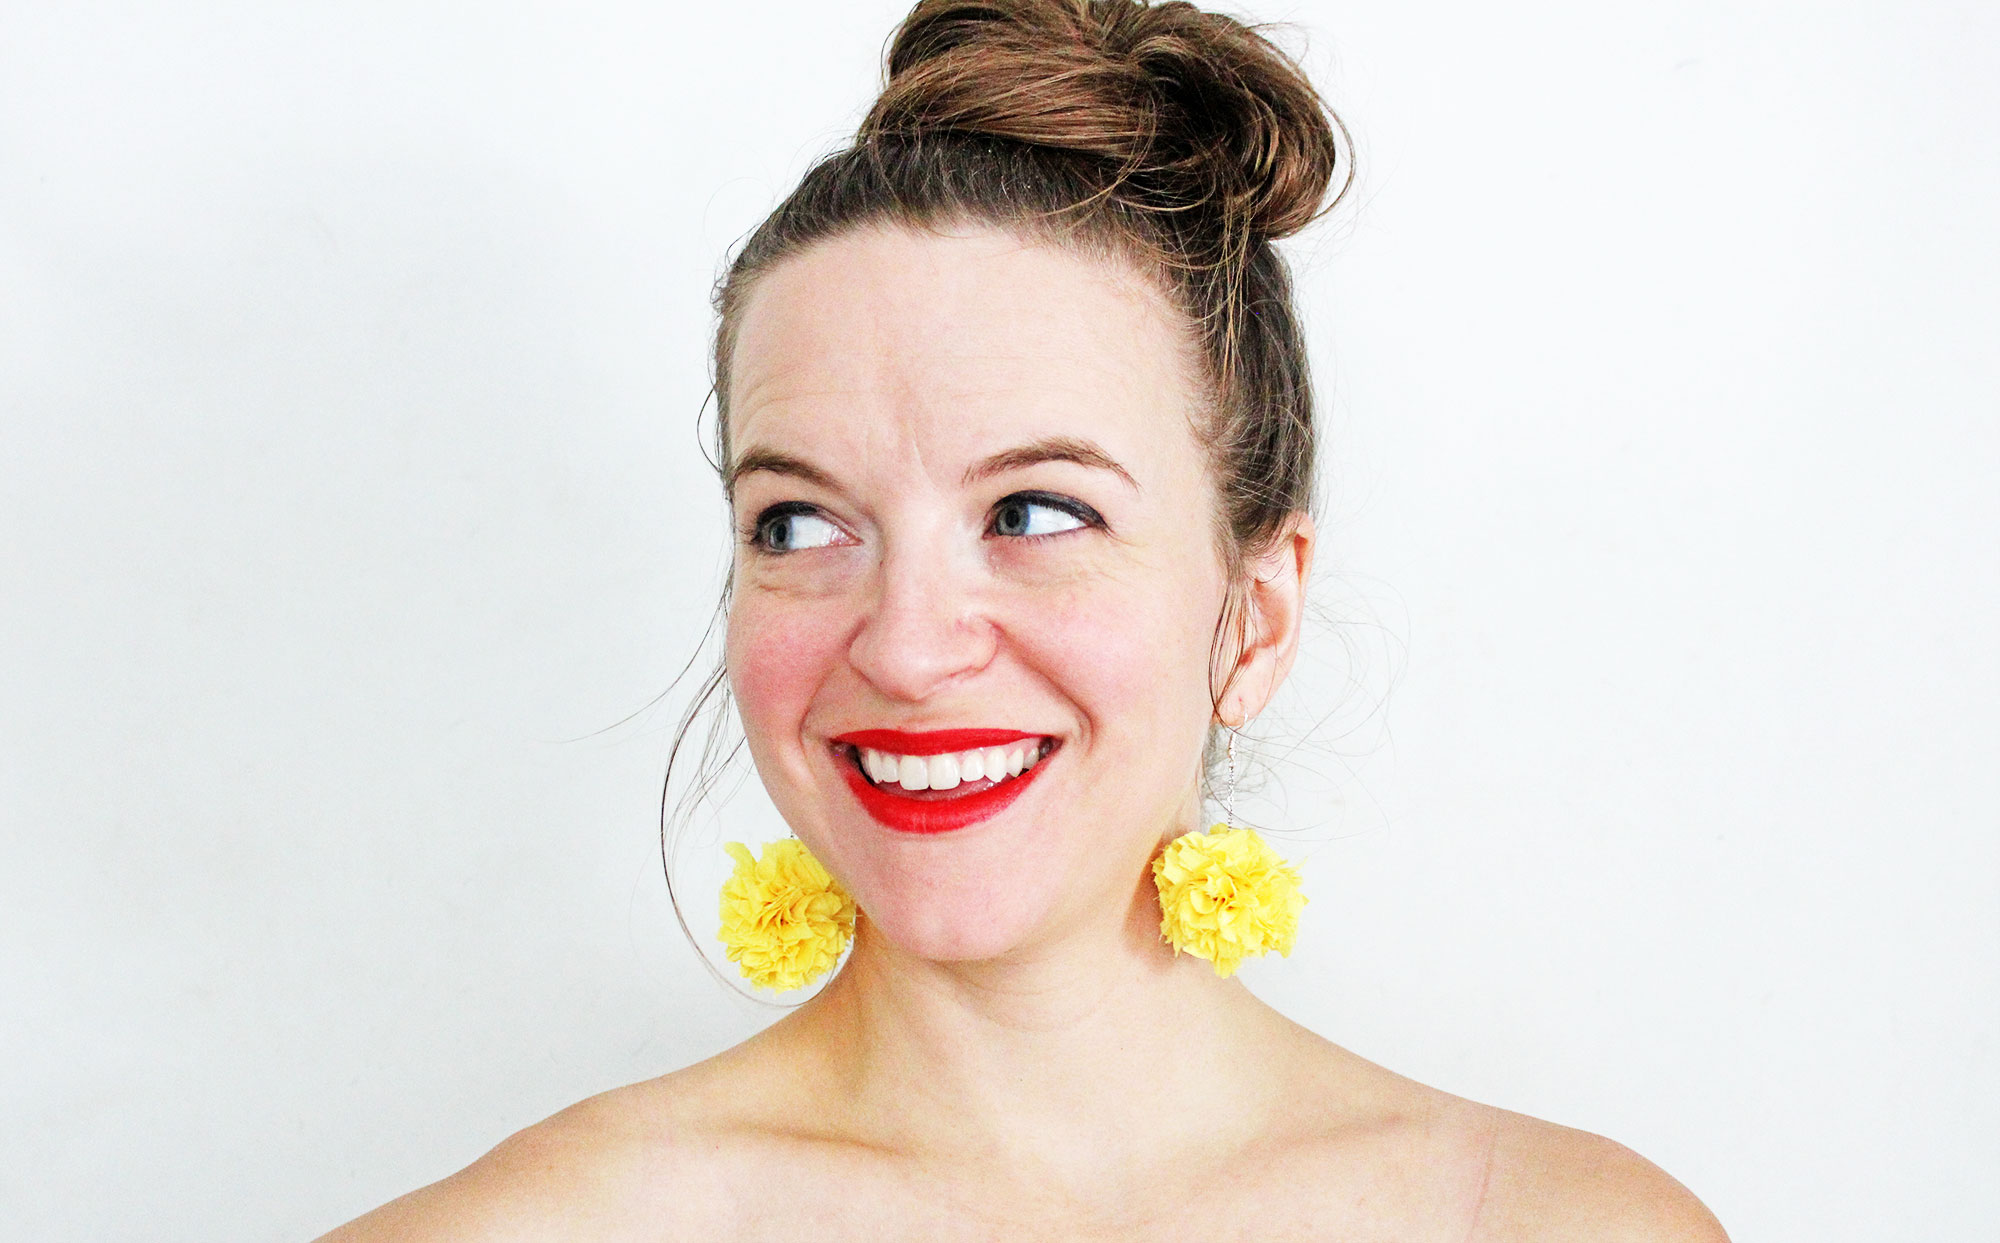 How to Make Earrings from Fabric Scraps